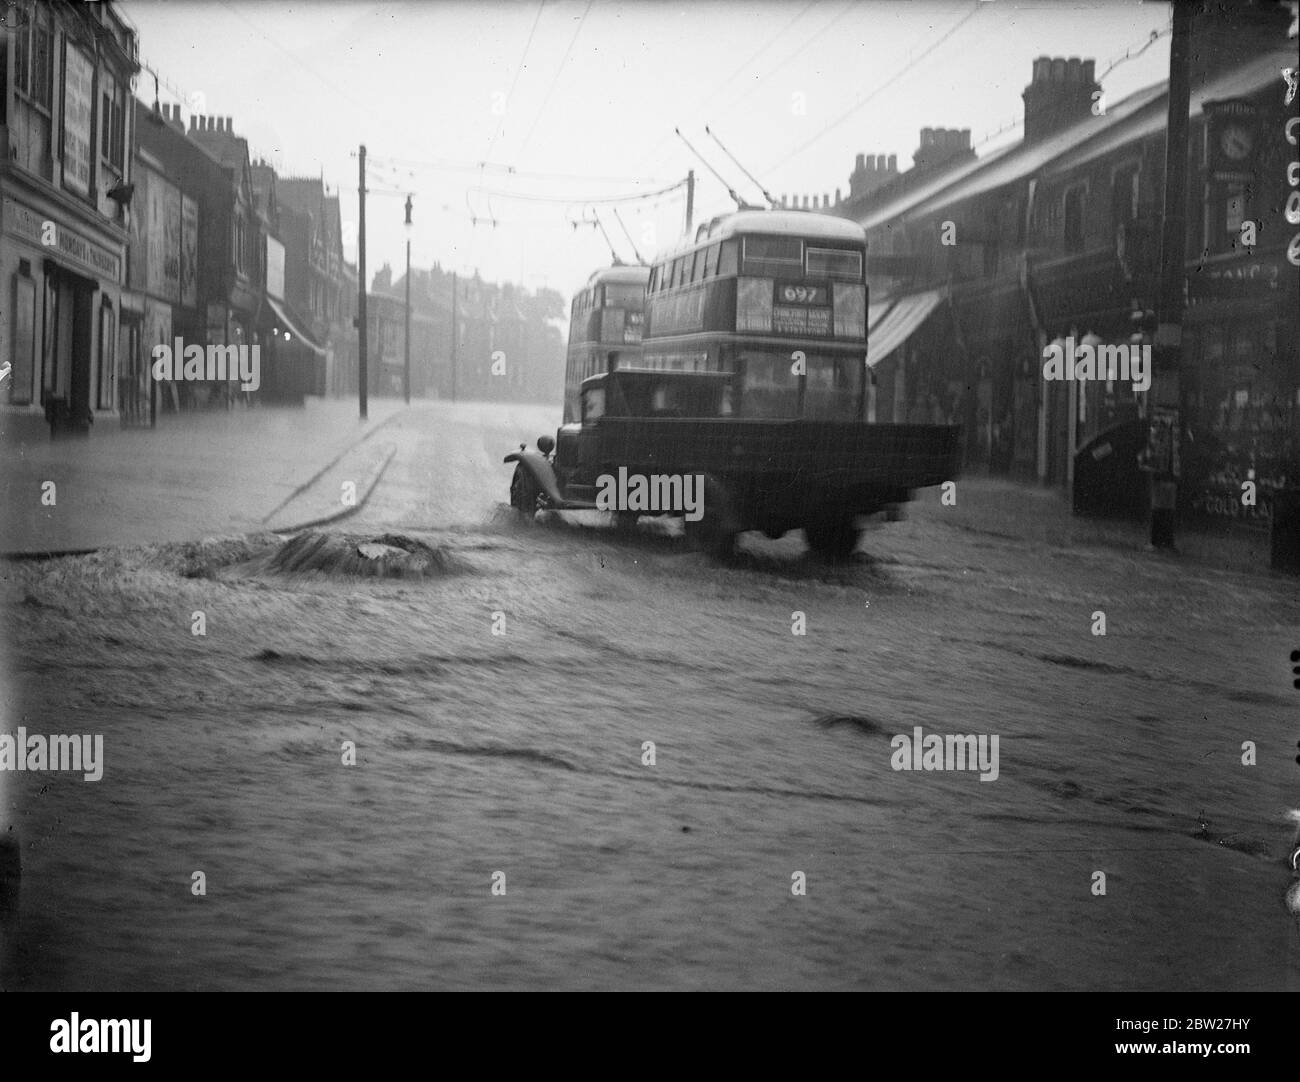 A manhole forced up in the flooded junction of Chingford Road and Forest Road Walthamstow Torrential rains and flooded roads and houses, followed a terrific summer thunderstorm which created havoc in Walthamstow. 15 July 1937. Stock Photo